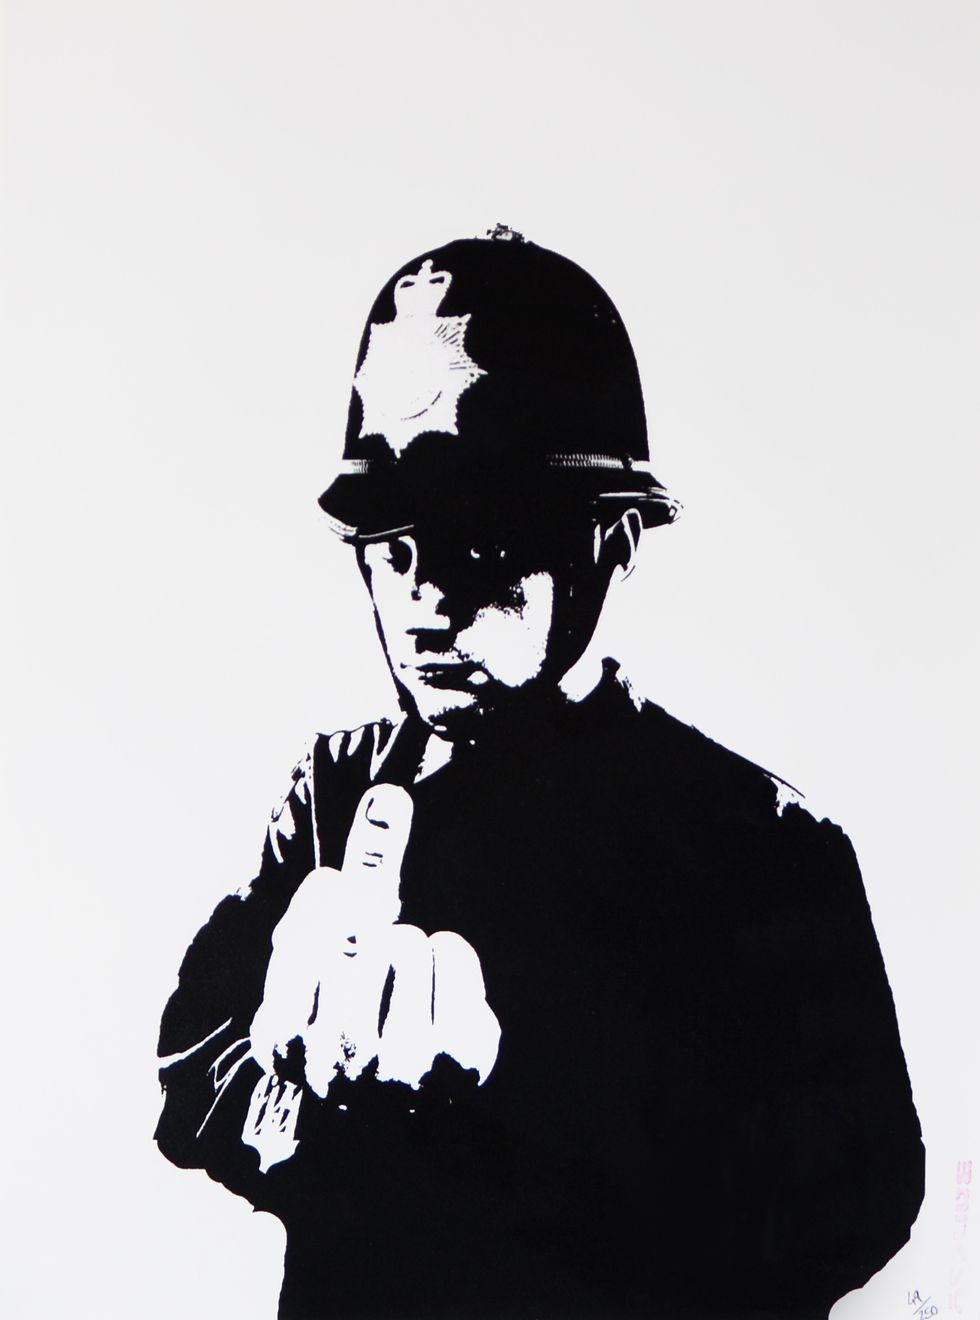 Illustration, Stencil, Black-and-white, Art, Photography, Silhouette, Fictional character, Style, 